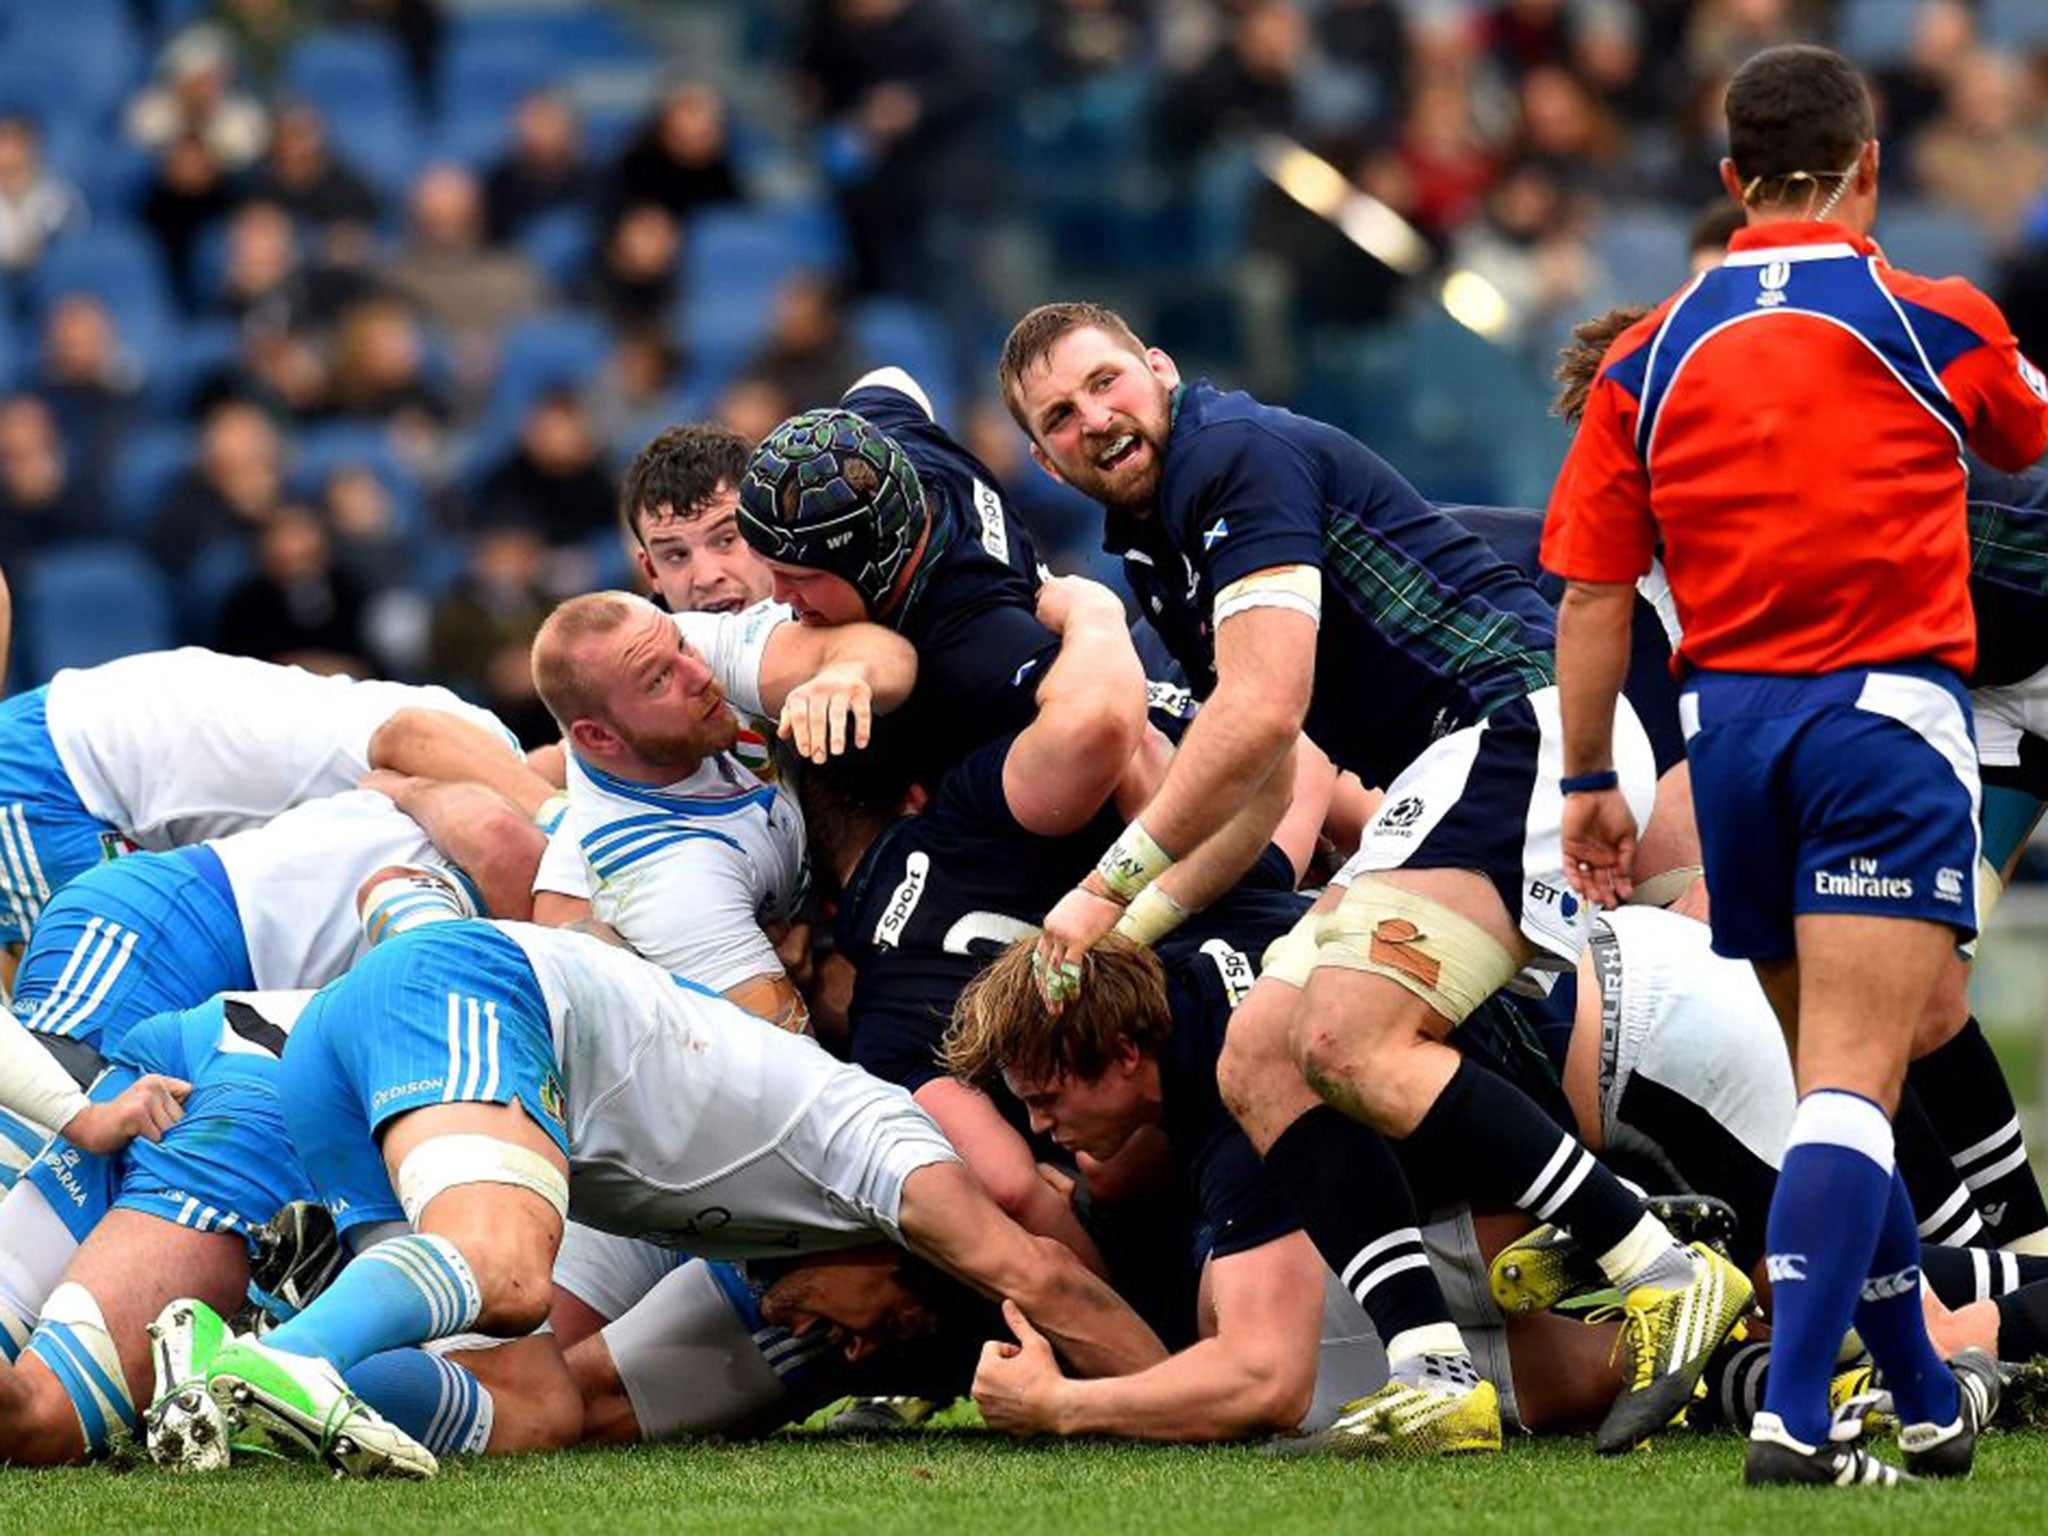 A scrum goes down in the Italy v Scotland game